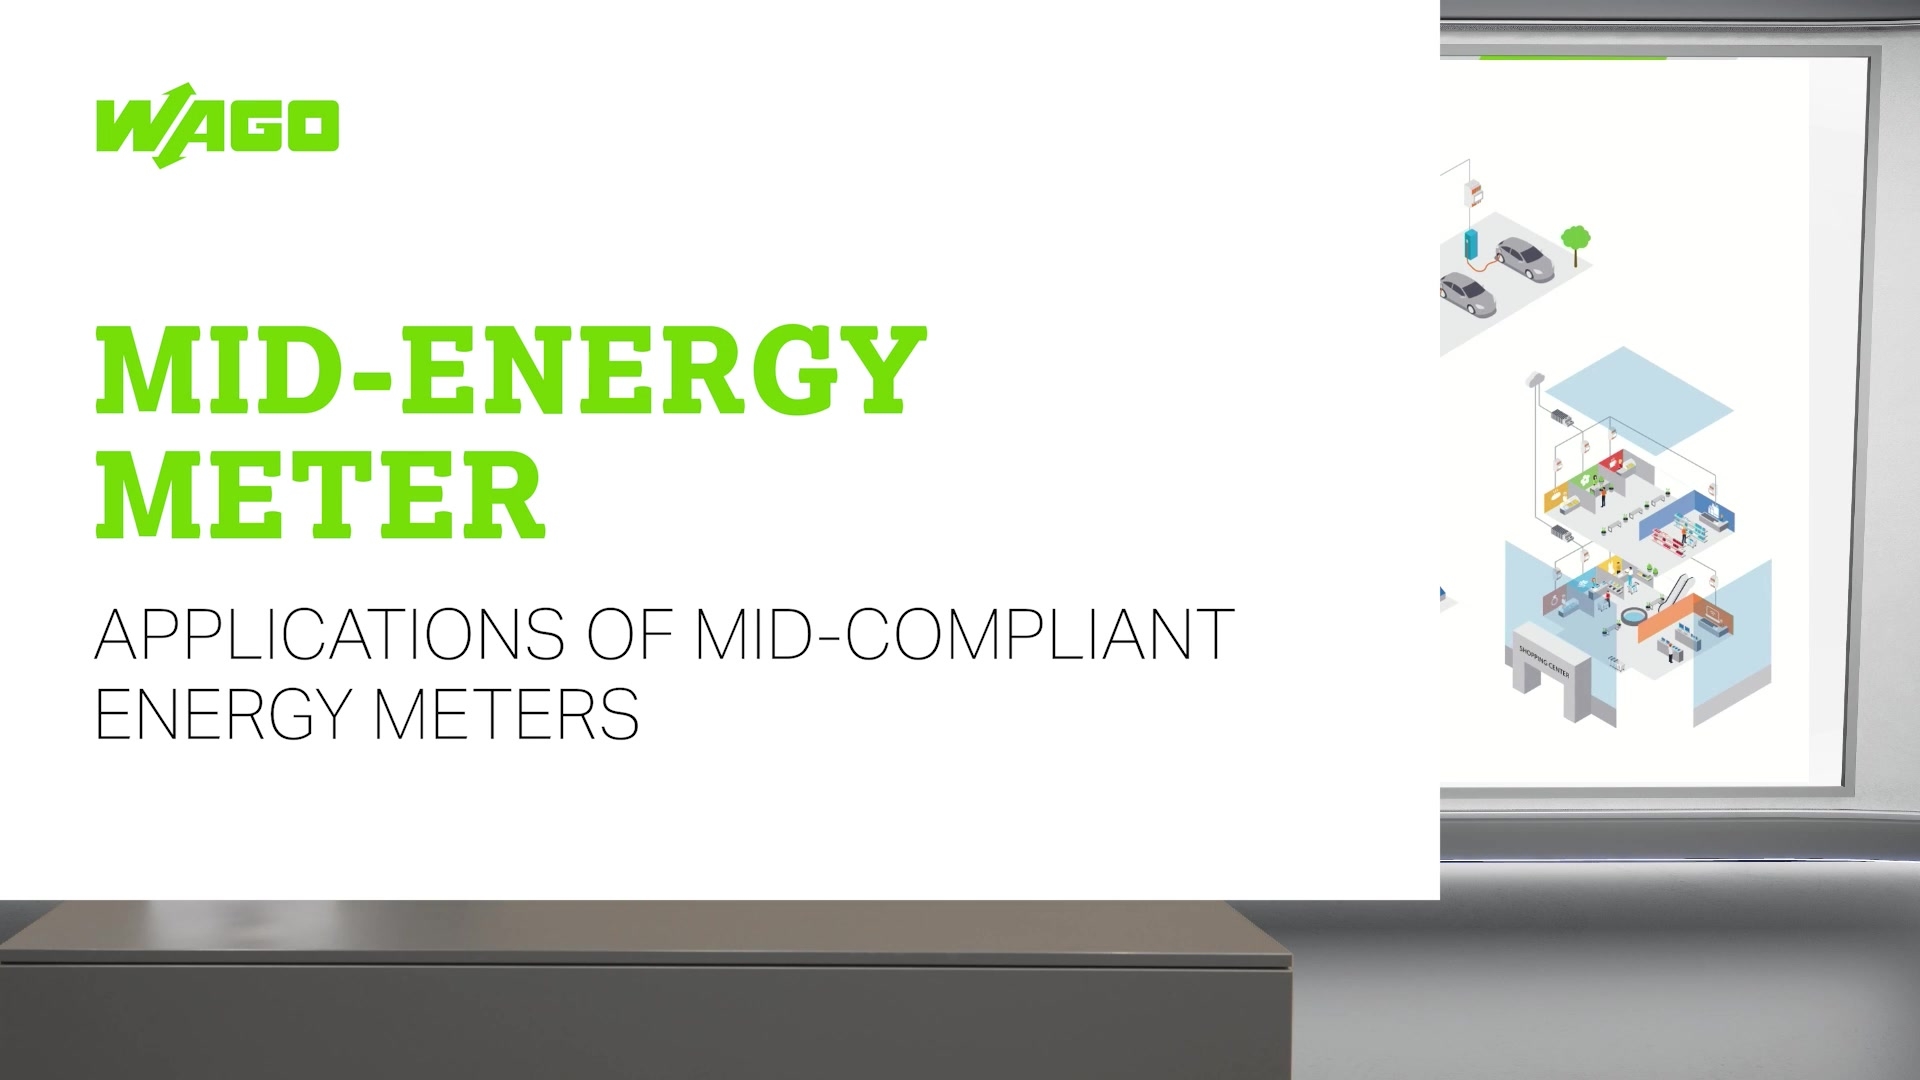 Applications of MID-compliant energy meters